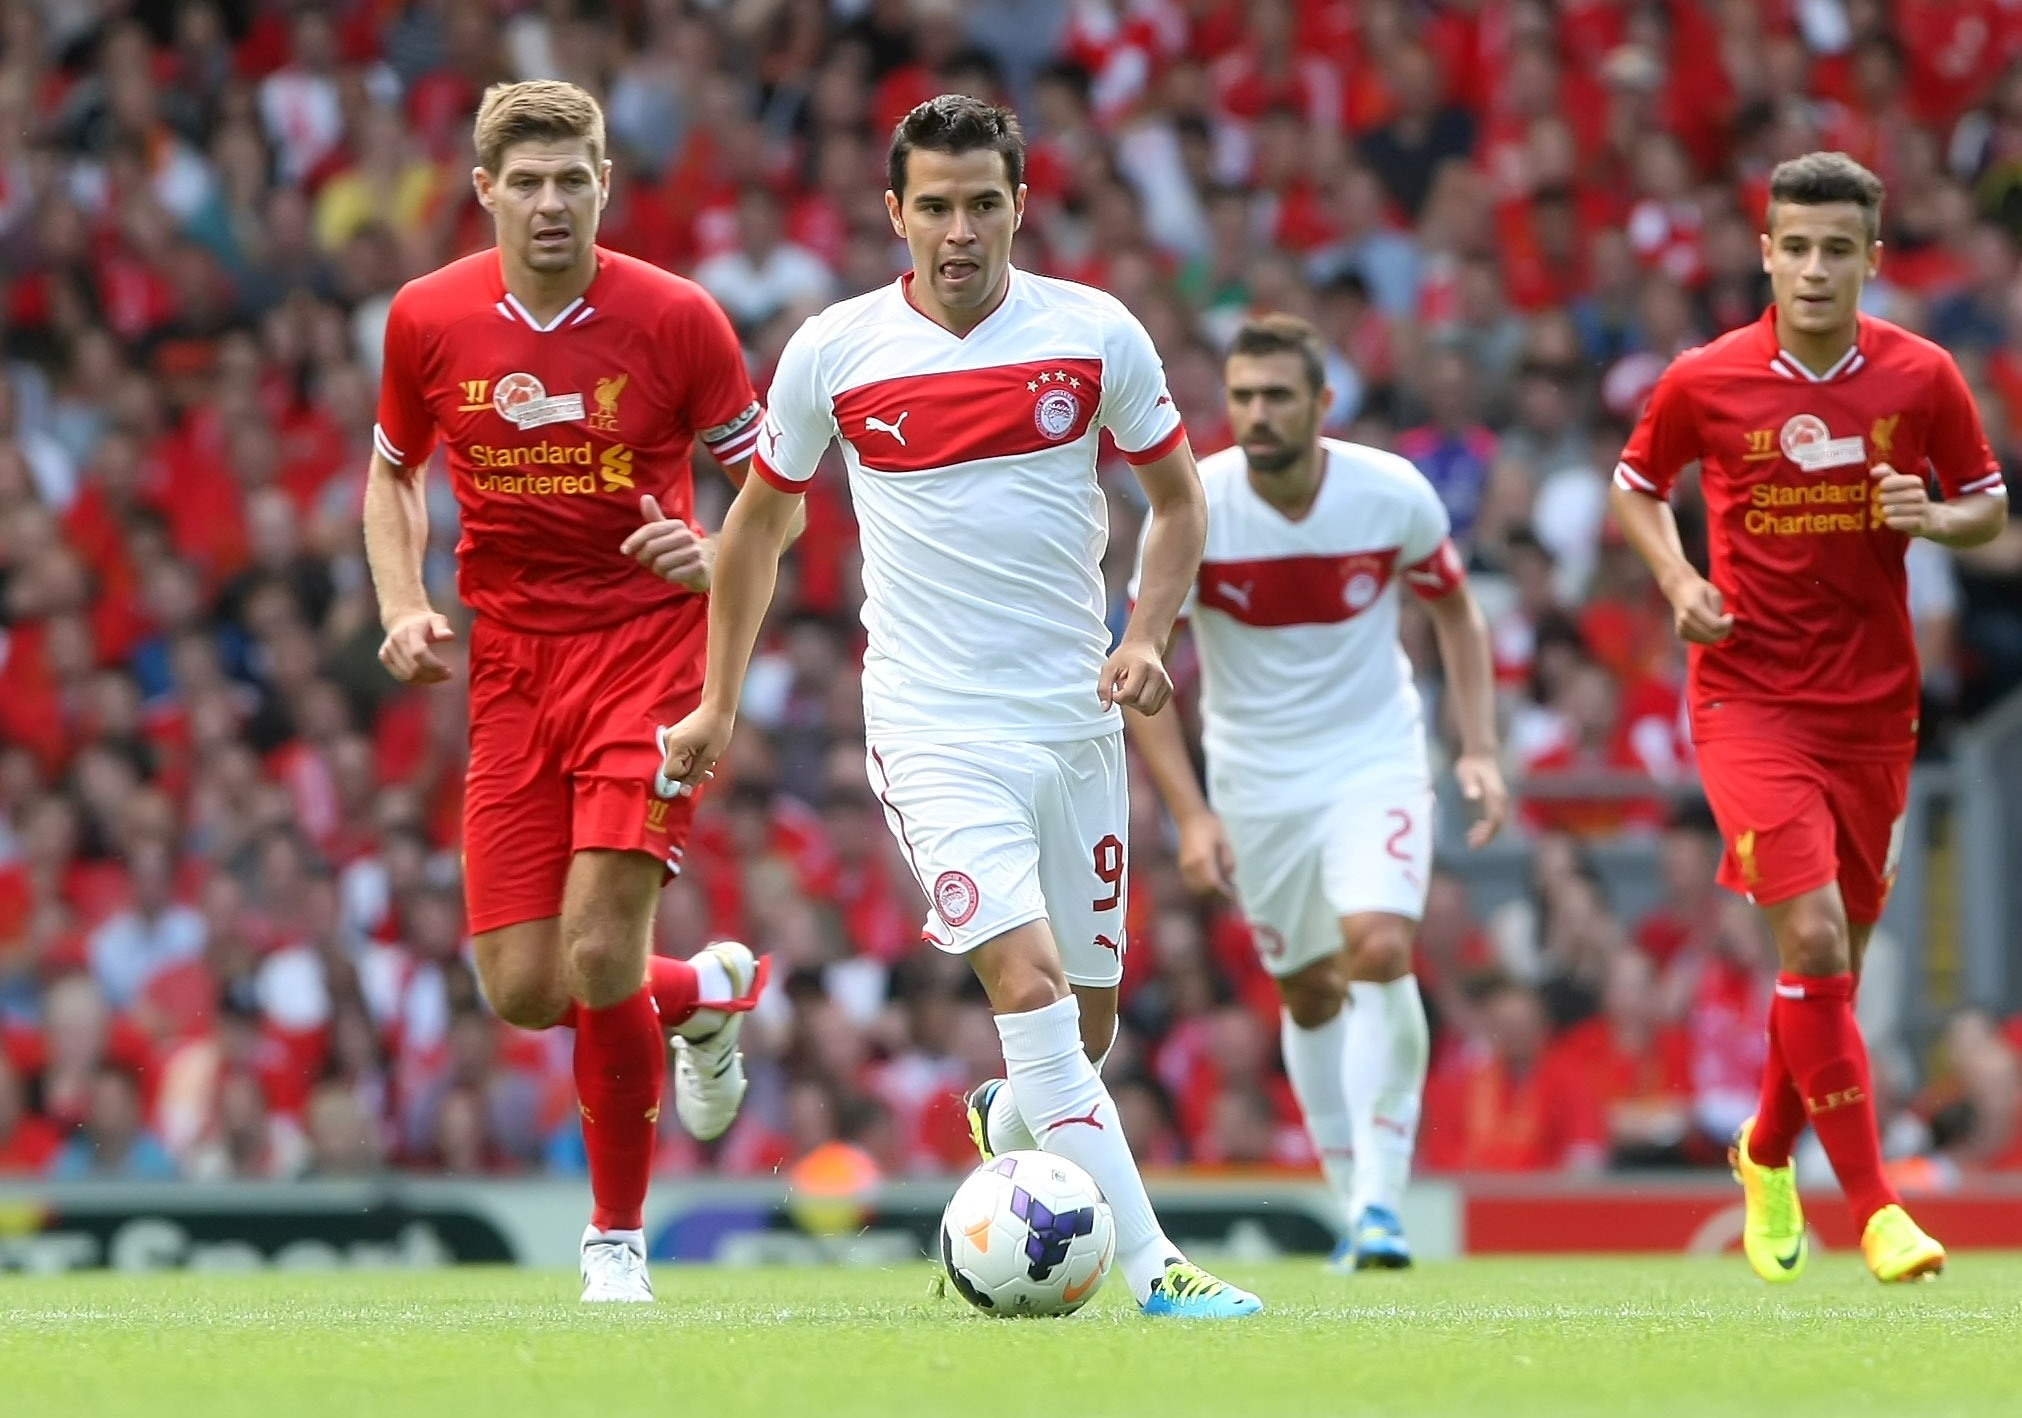 Liverpool – Olympiacos 2-0